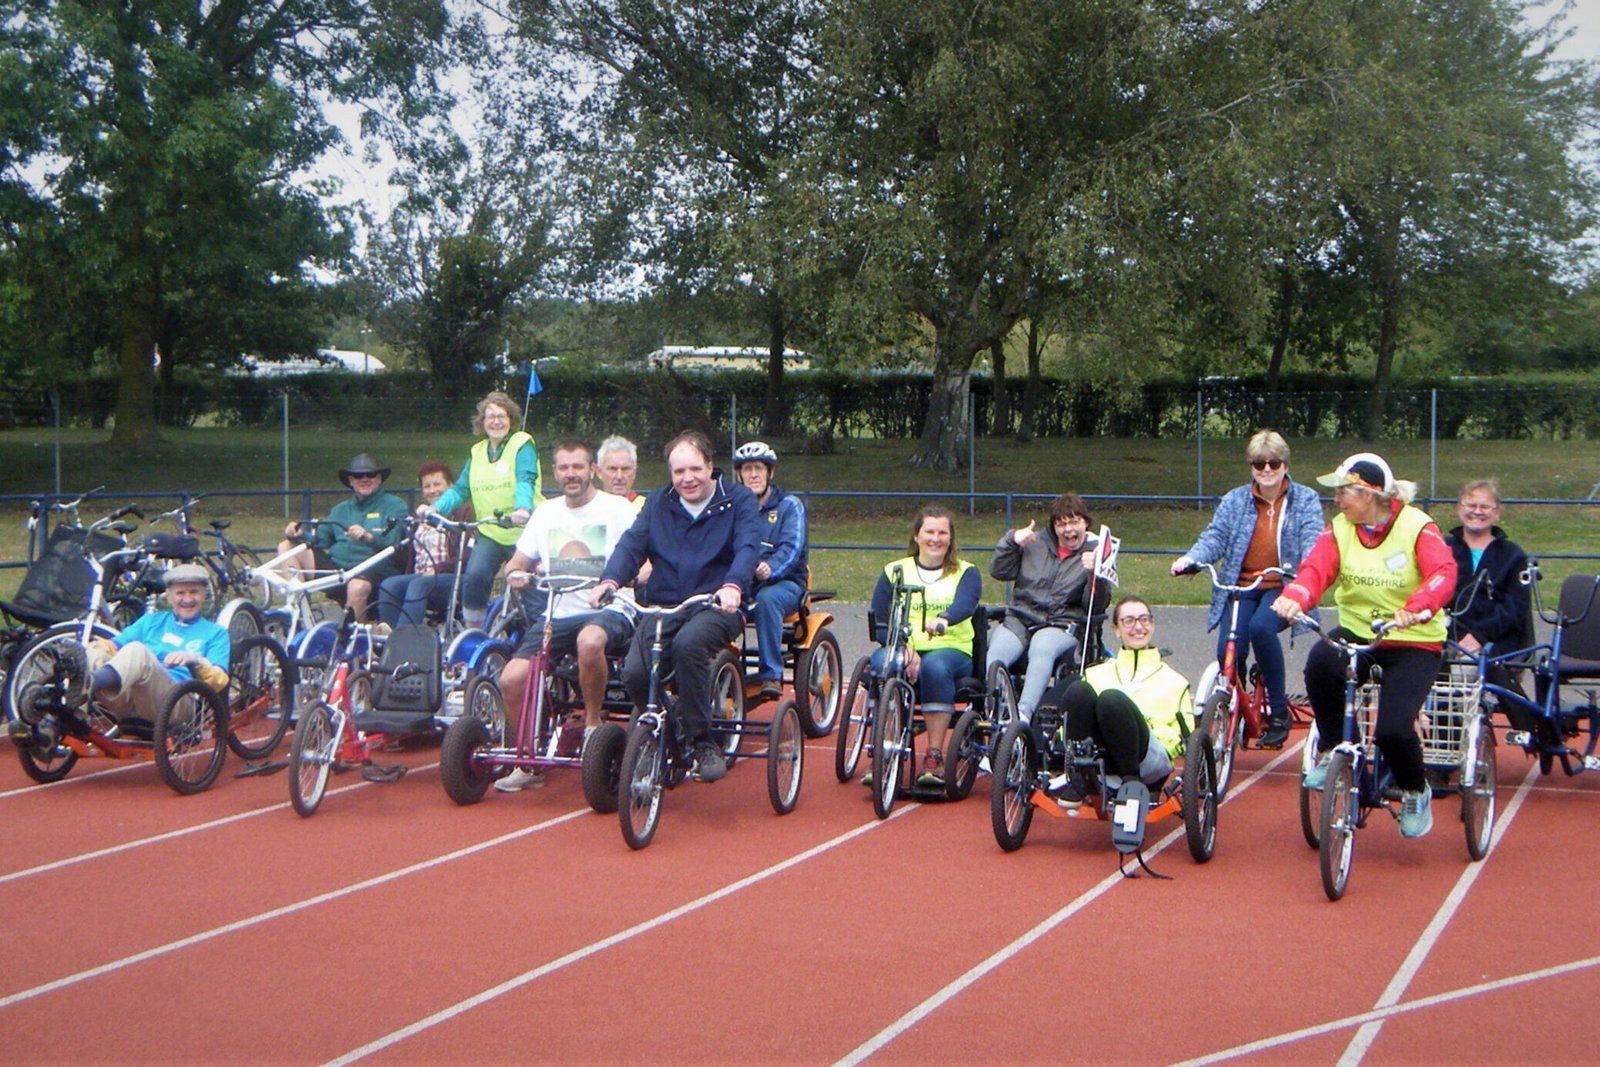 Group of cyclists of all abilities on a range of different types of bike, including bicycles, tricycles, low-slung four-wheelers, hand powered. Lined up on an athletics track